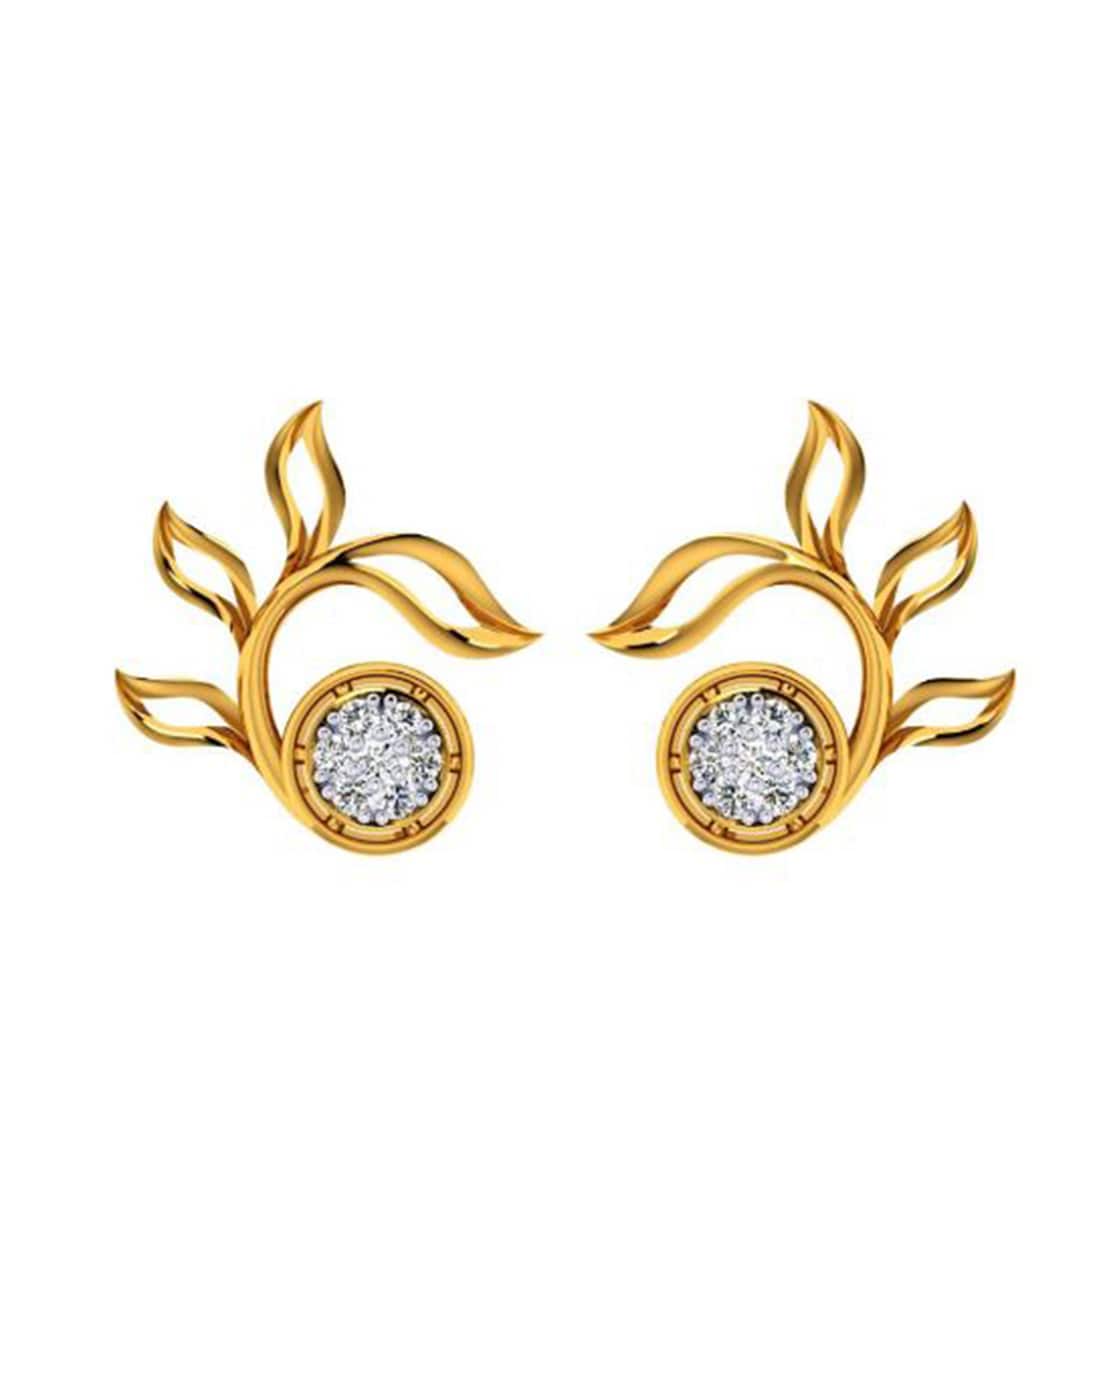 18kt yellow gold with fabulous cubic zircon stone handmade earrings hoops  bali nose ring fabulous womens daily use jewelry  TRIBAL ORNAMENTS